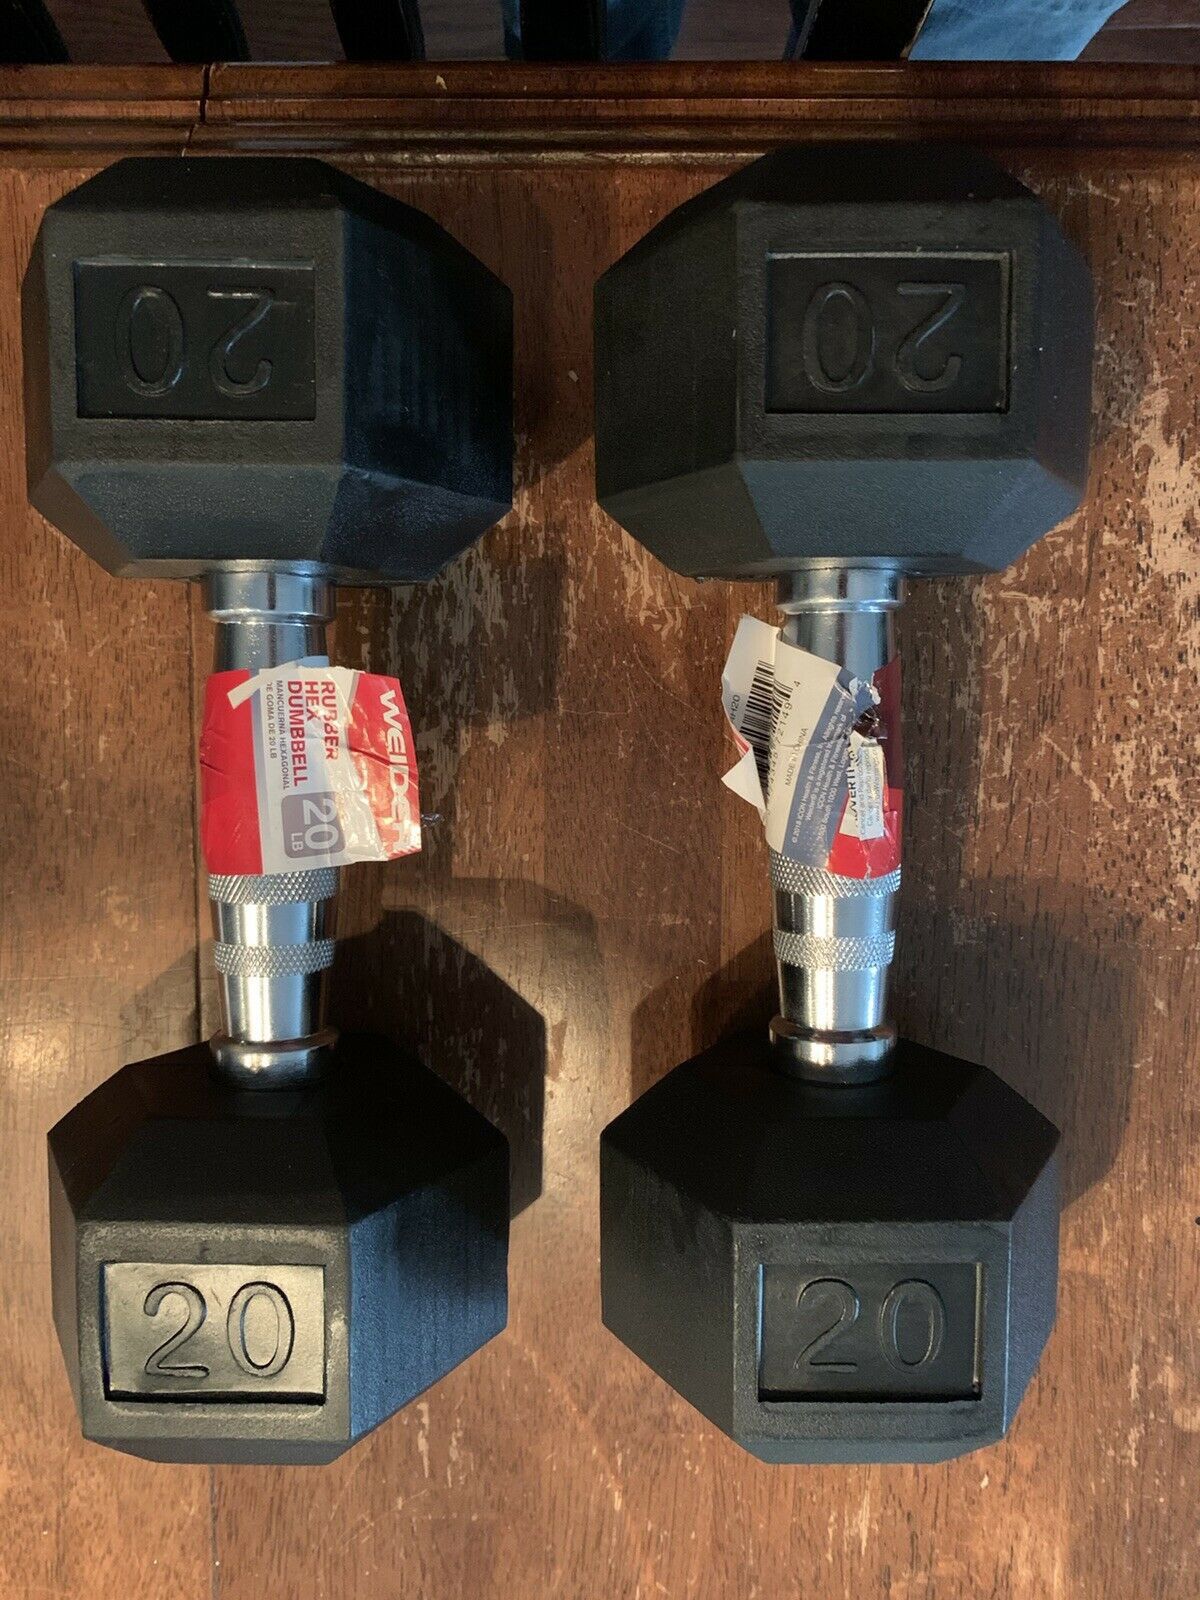 Brand New: 20lb Pair of Rubber Coated Hex Dumbbells Weights 40lb Total